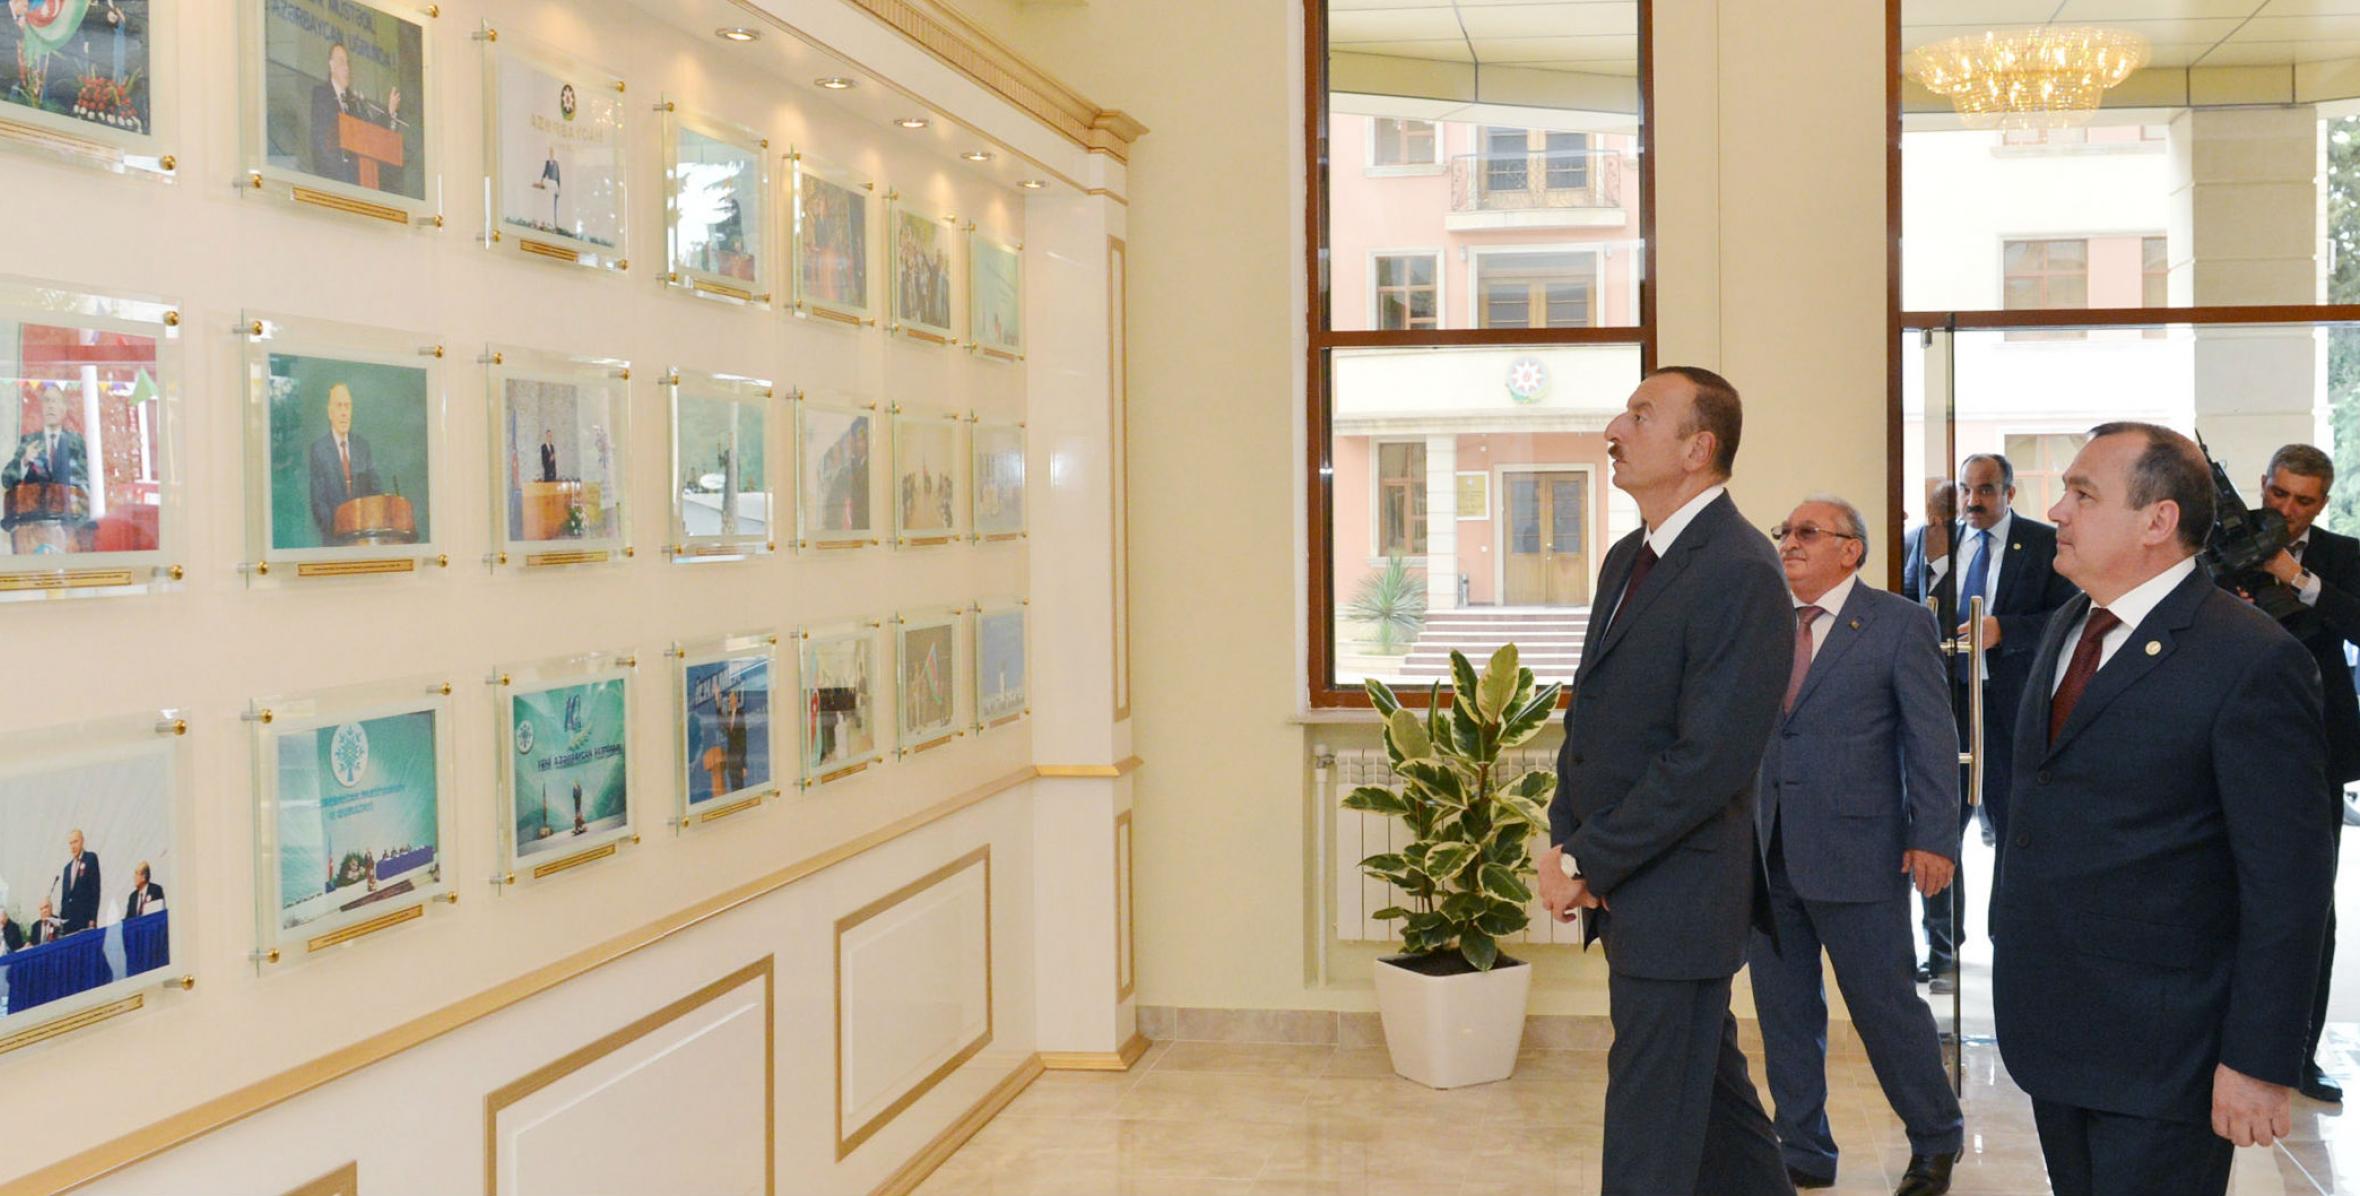 Ilham Aliyev attended the opening of a new office building of the Gazakh District branch of the “Yeni Azerbaijan Party”